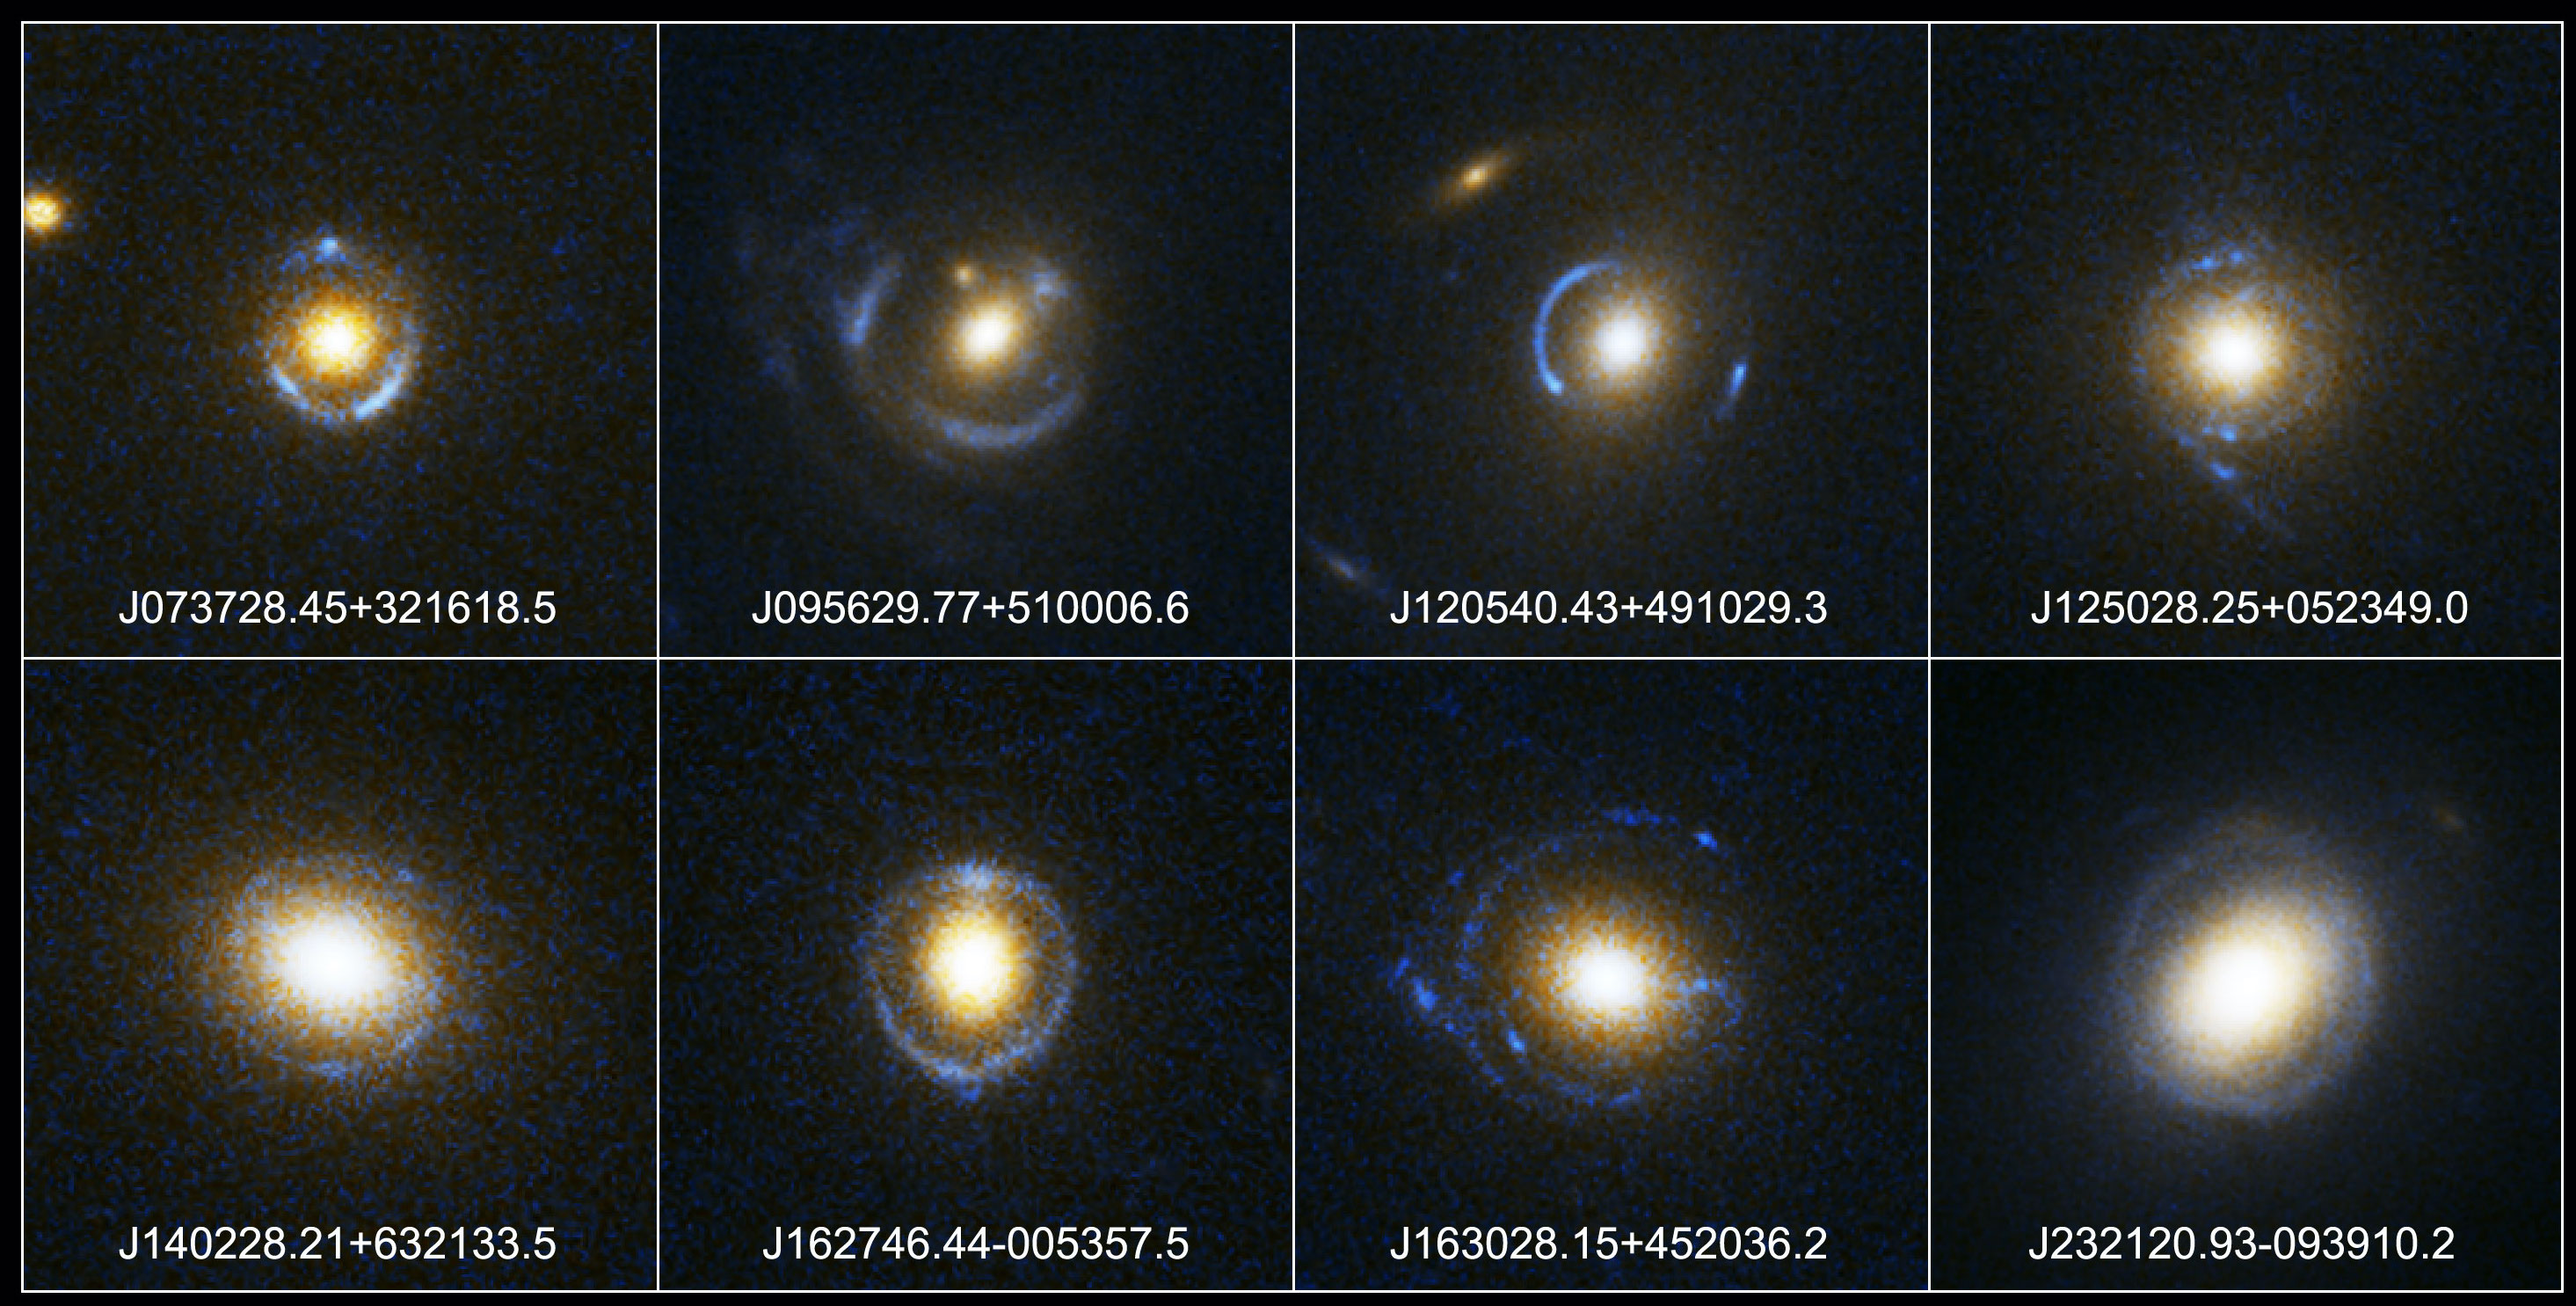 A gallery of Einstein rings from the SLACS survey